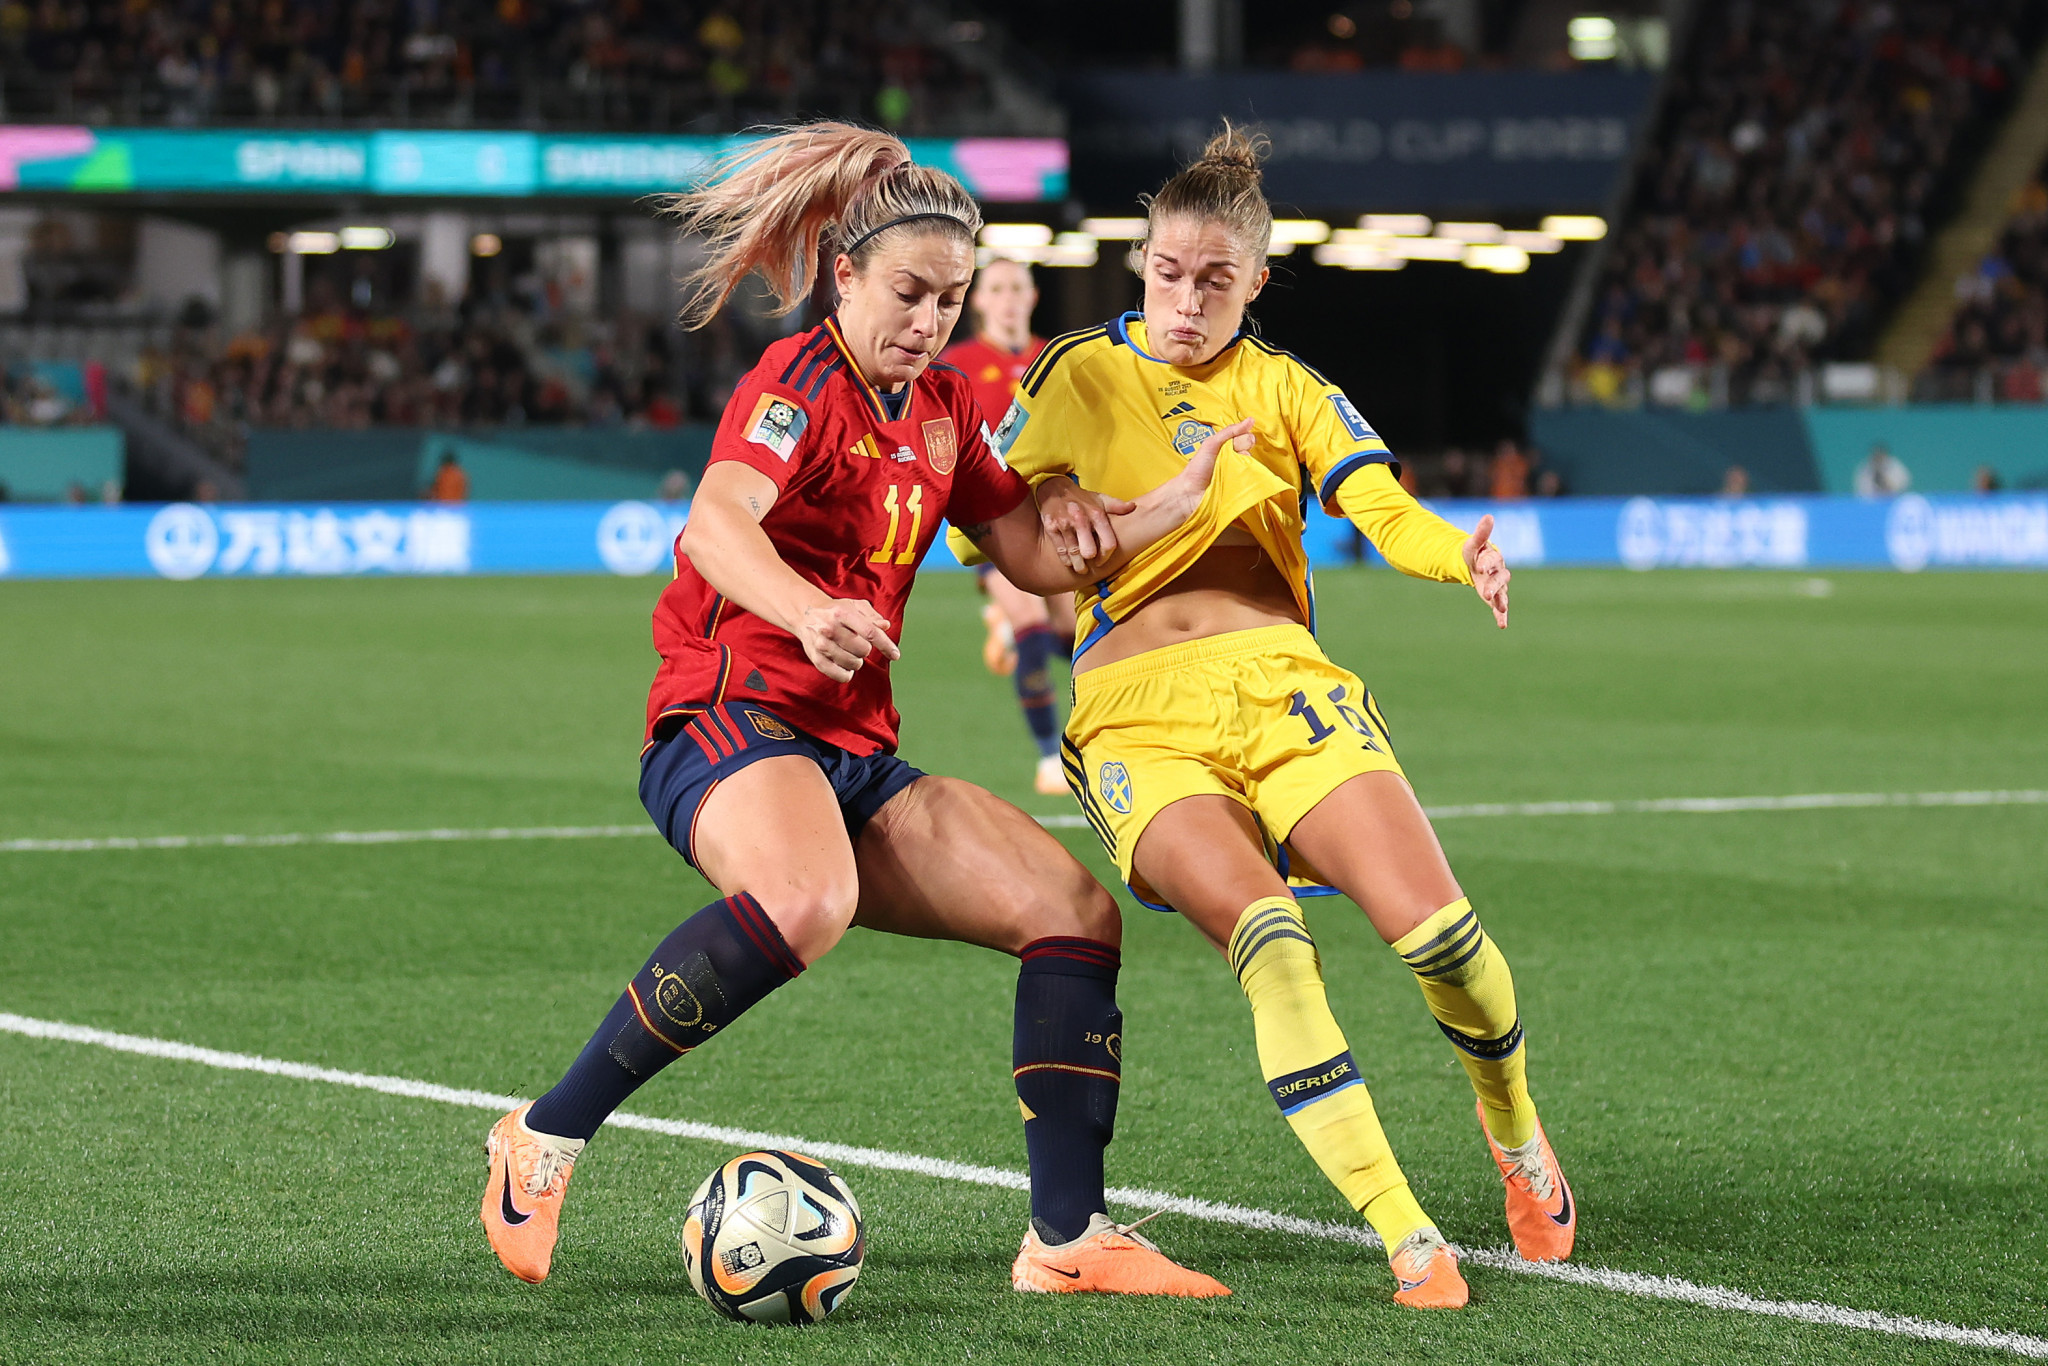 Football dominates mainstream sports media coverage outside of the Summer Olympics, while tournaments such as the FIFA Women's World Cup are enjoyed unprecedented levels of engagement ©Getty Images